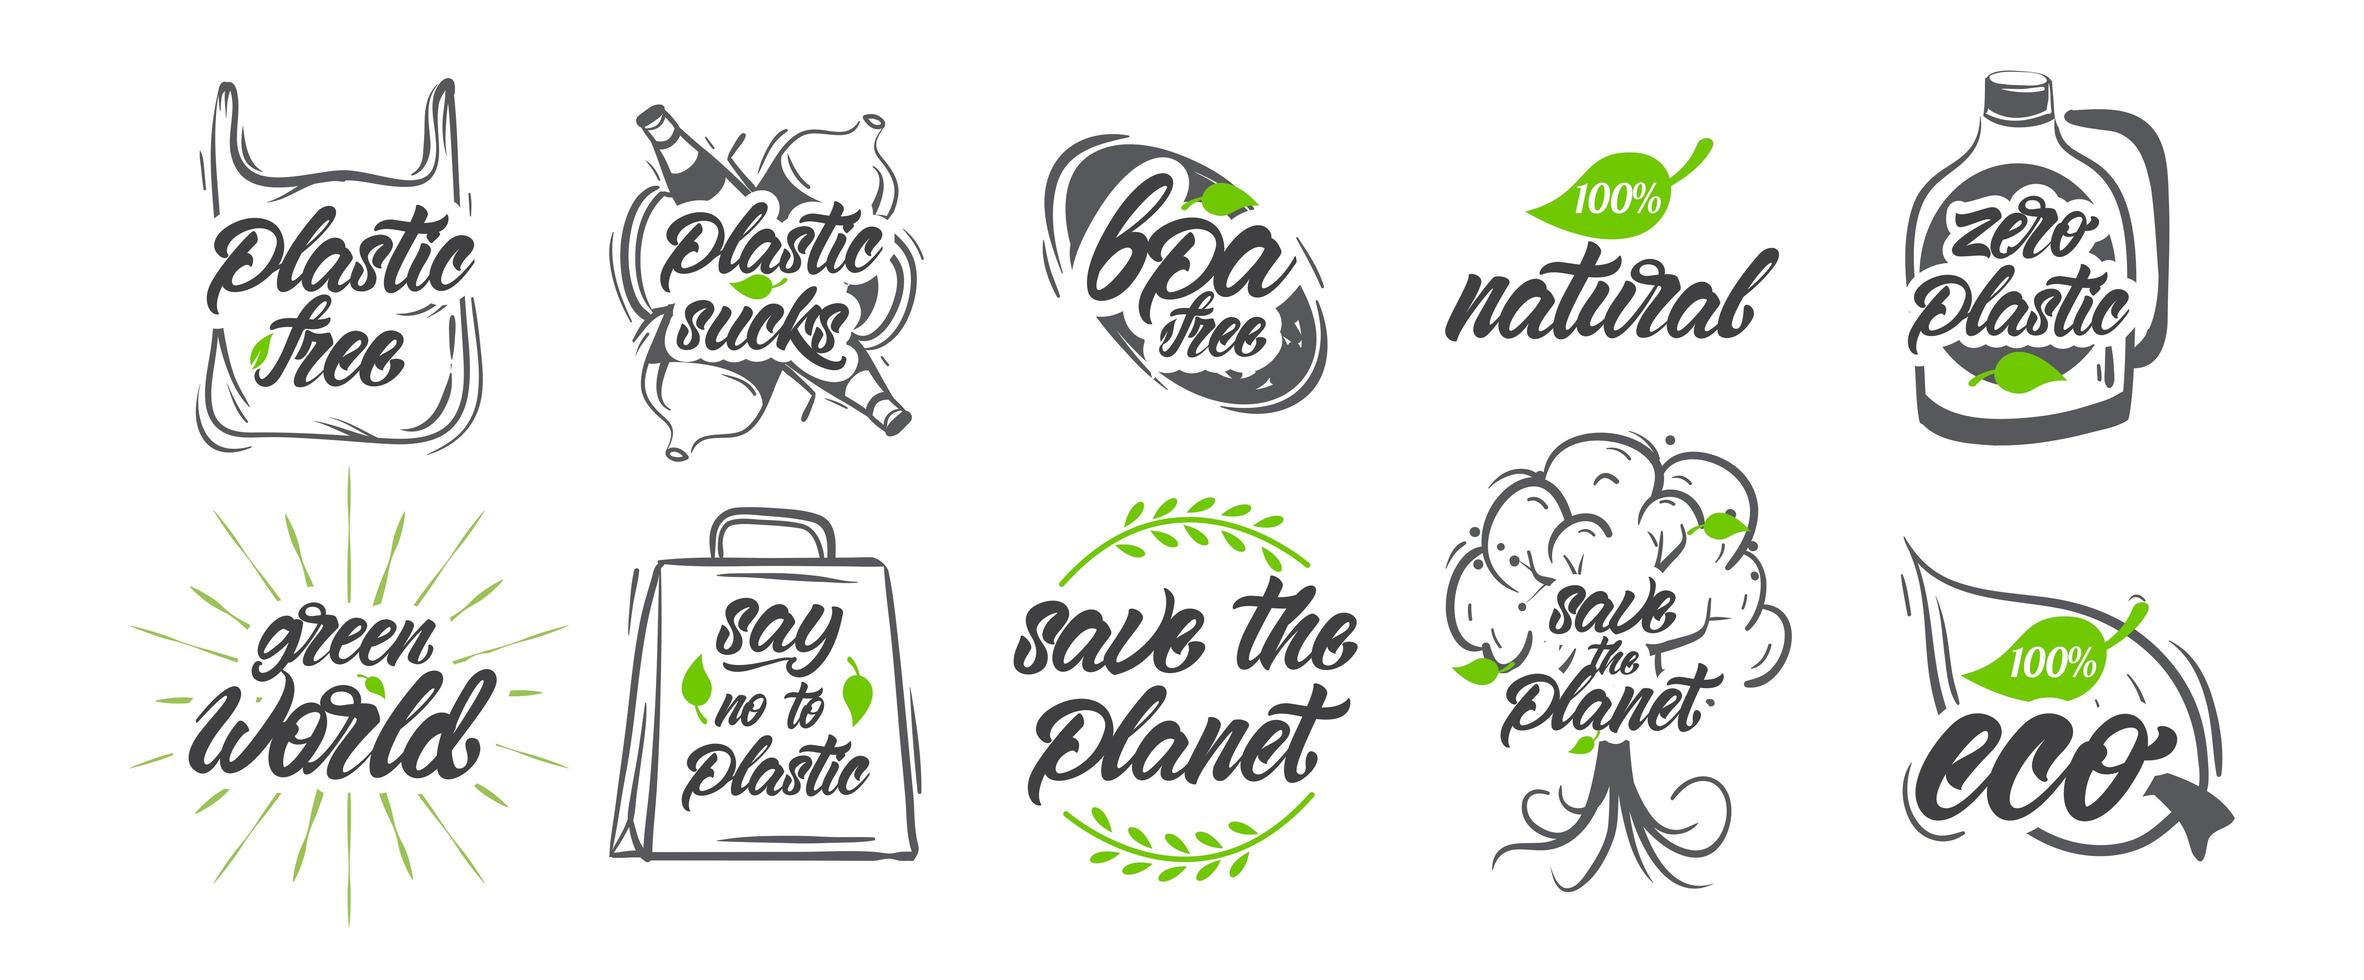 Collection of natural, no plastic, save the planet logos vector